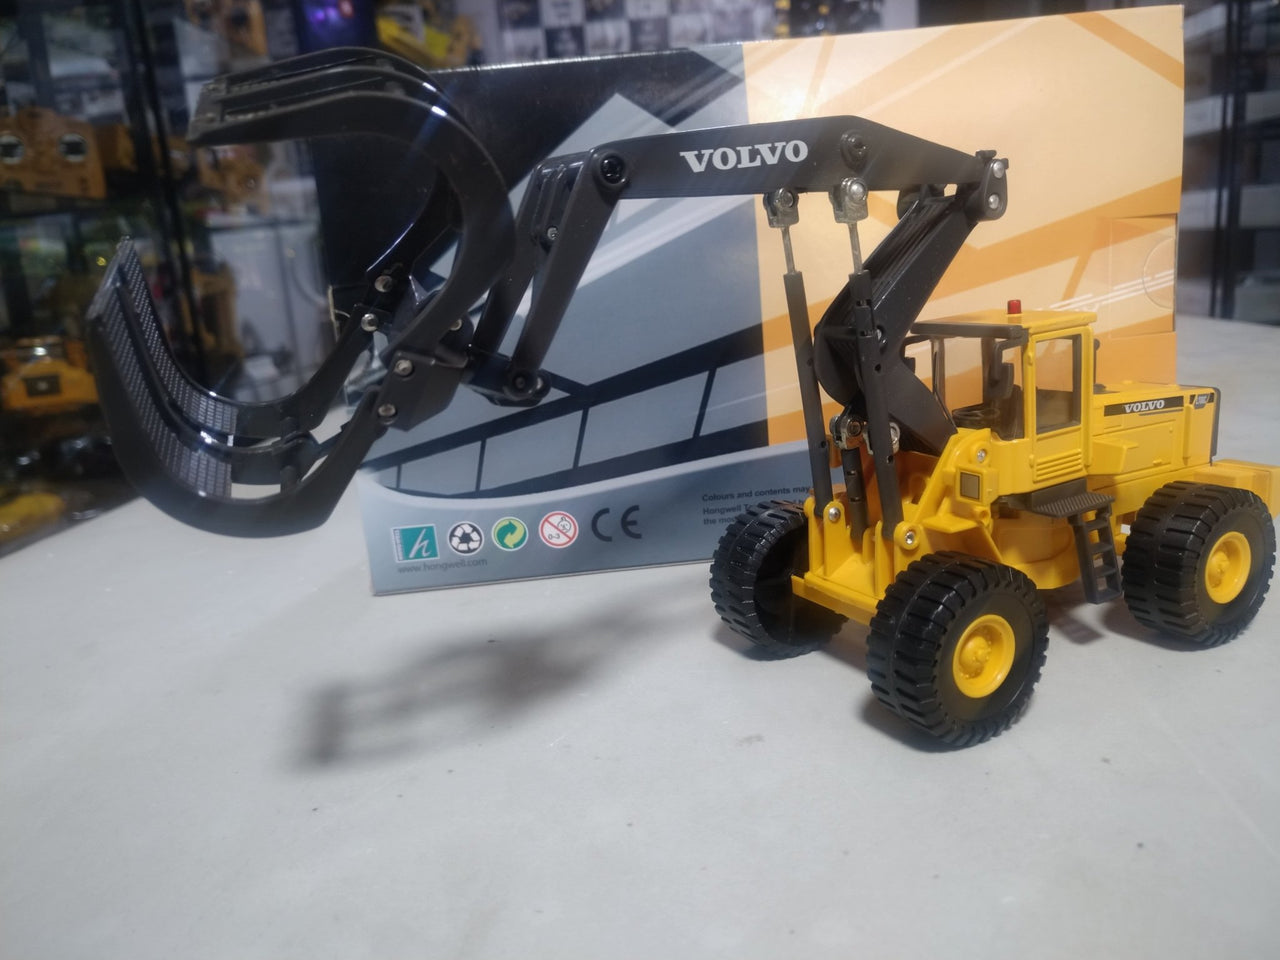 561-001 Volvo L180C Forestry Handler Scale 1:50 (Discontinued Model)